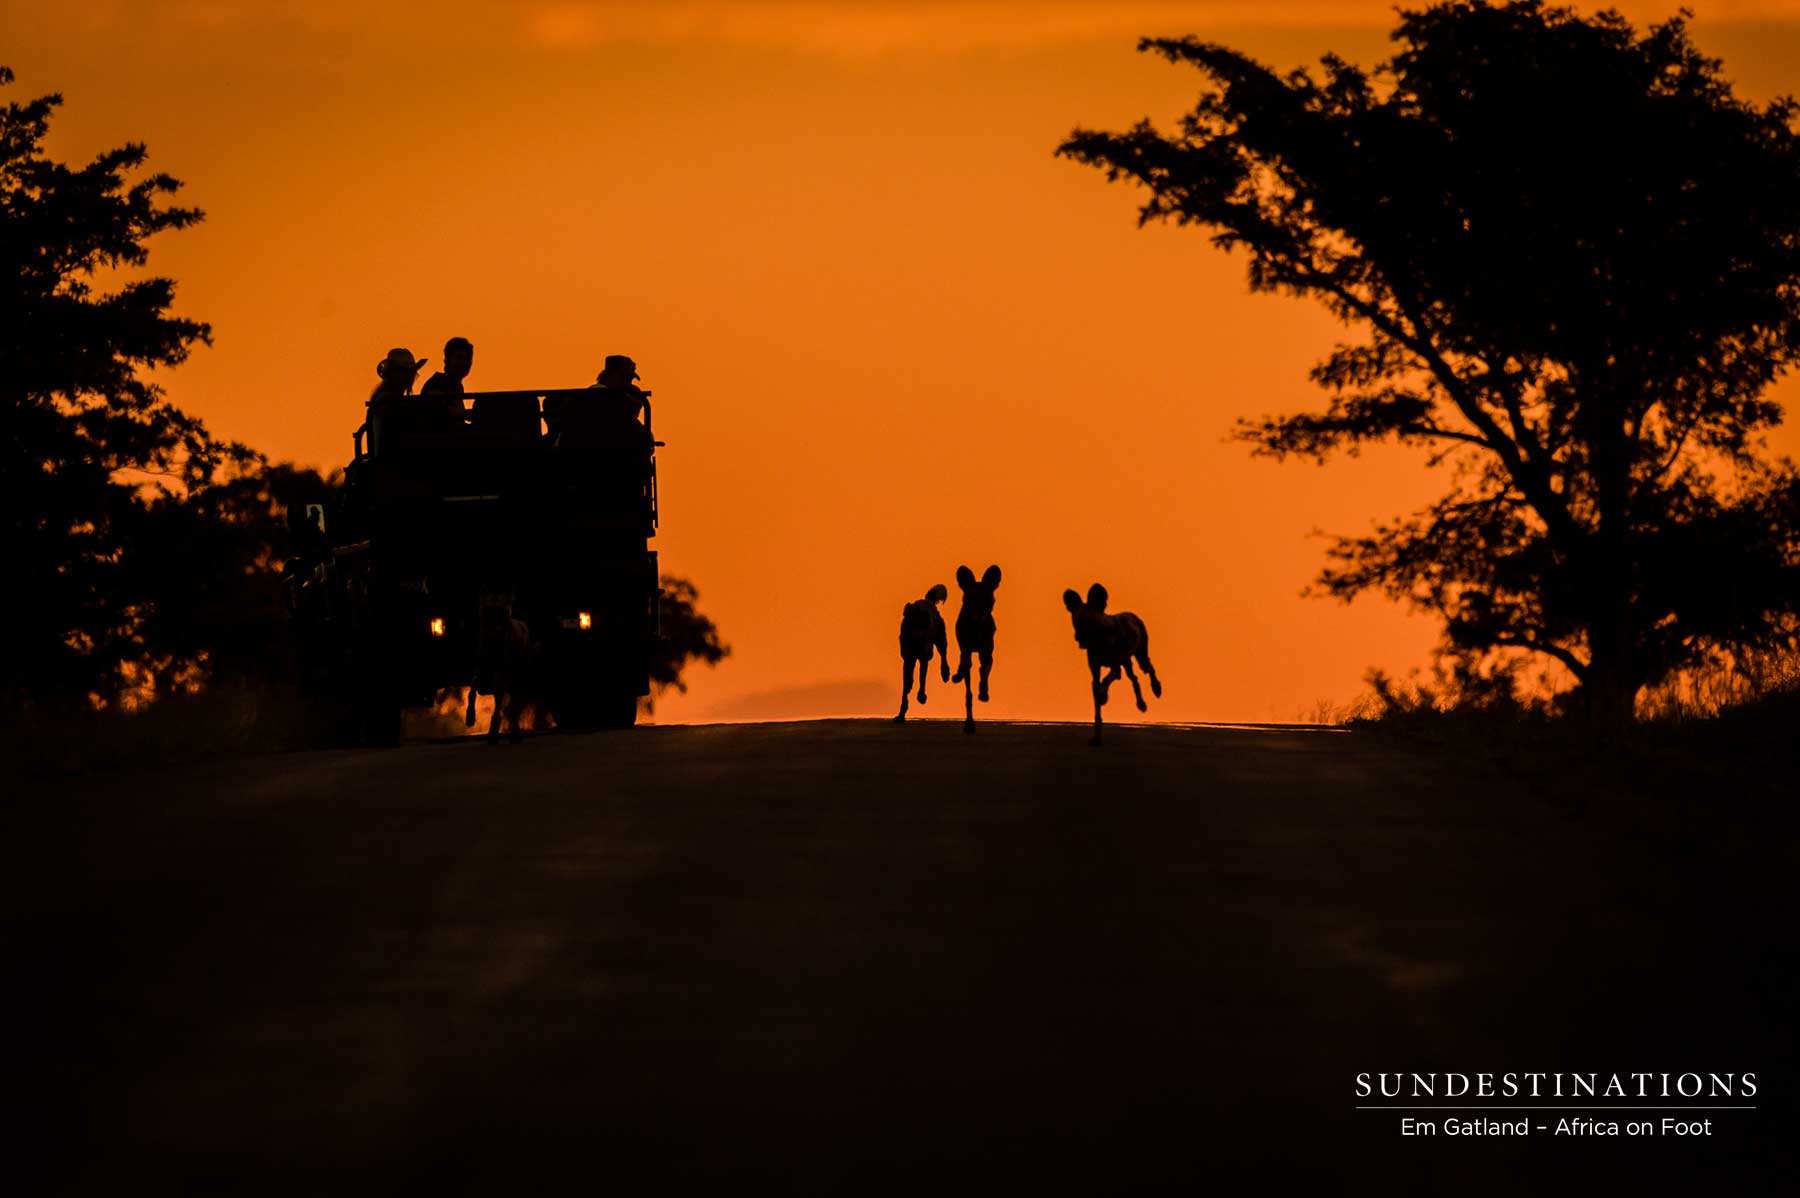 Wild Dogs Africa on Foot